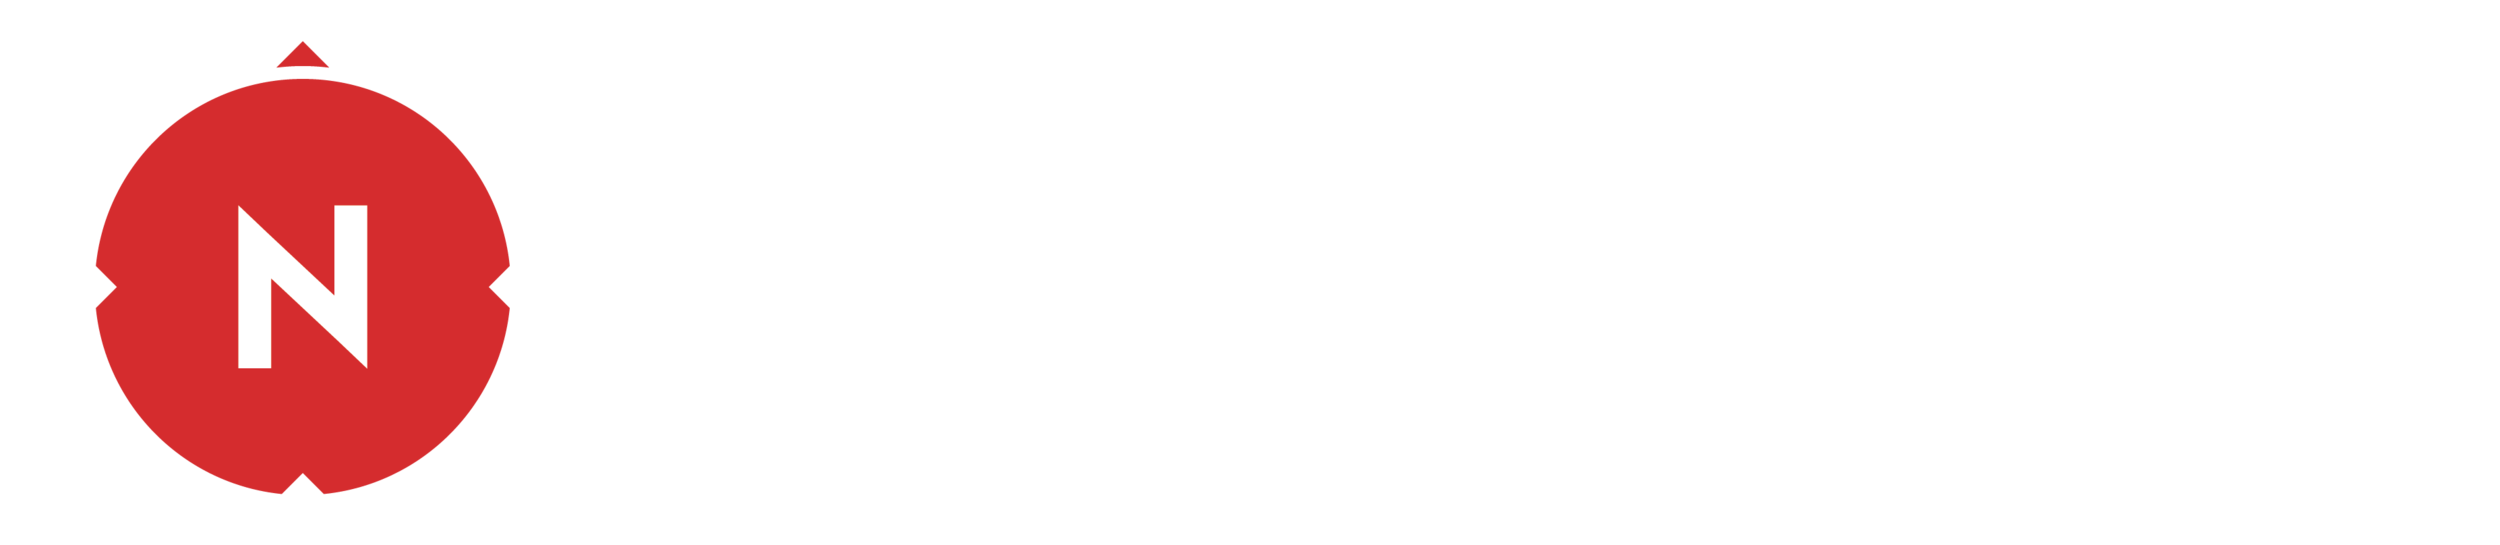 Forge North Services